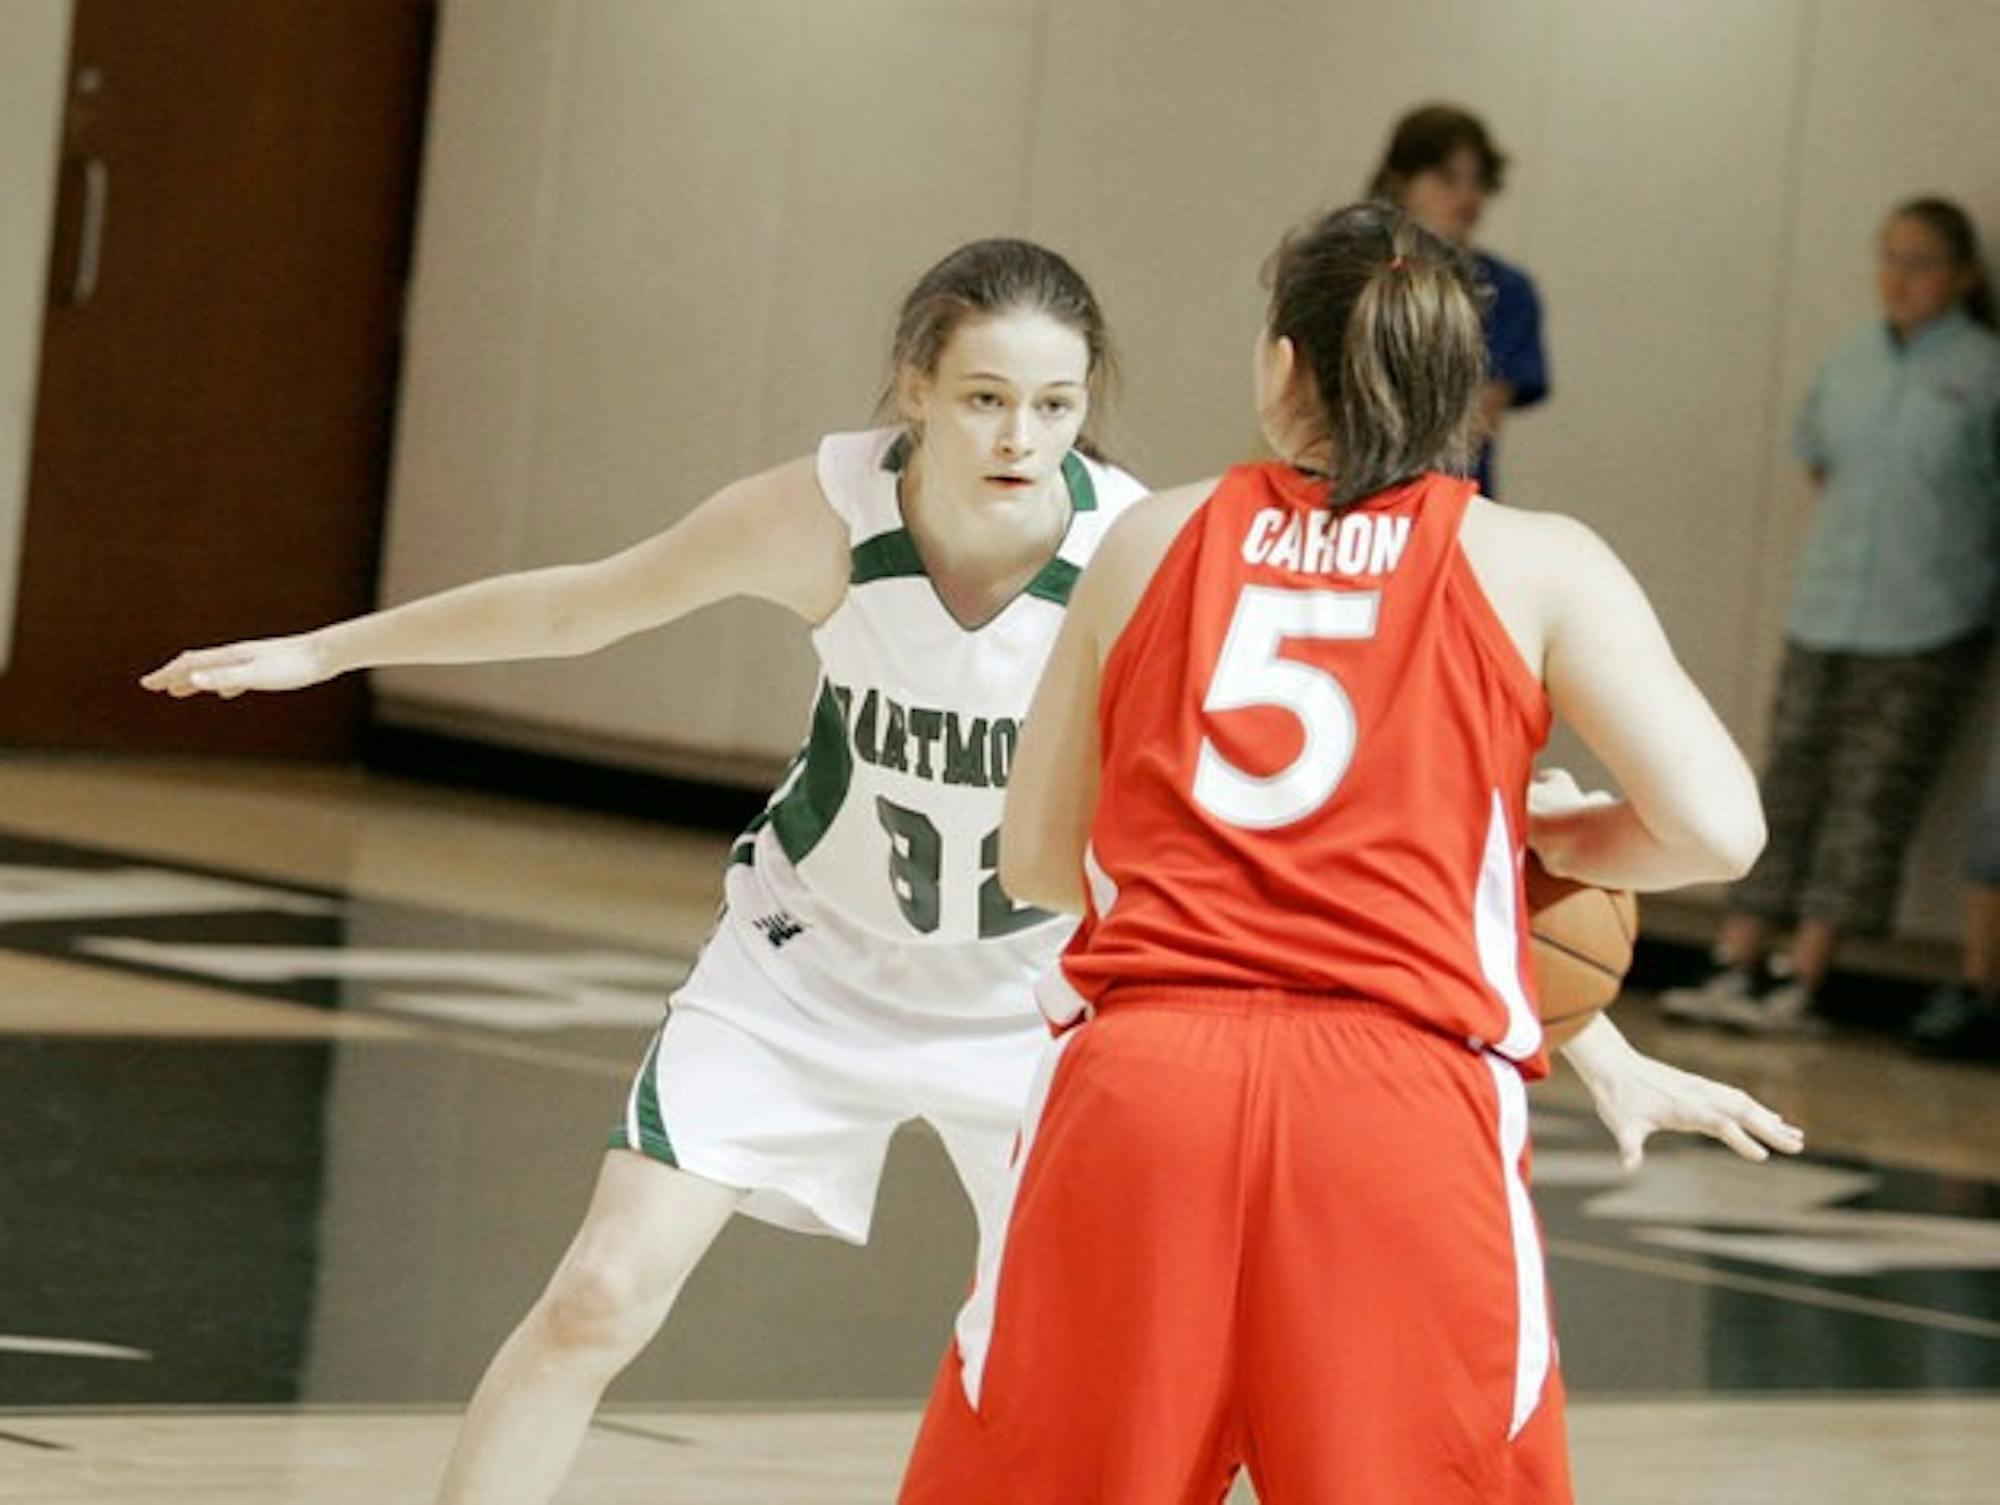 The women's basketball team could not gain leads against Marist and the University of Maine, notching only 35 points in their home opener against Marist, the lowest-scoring match for the Big Green women since 1977.